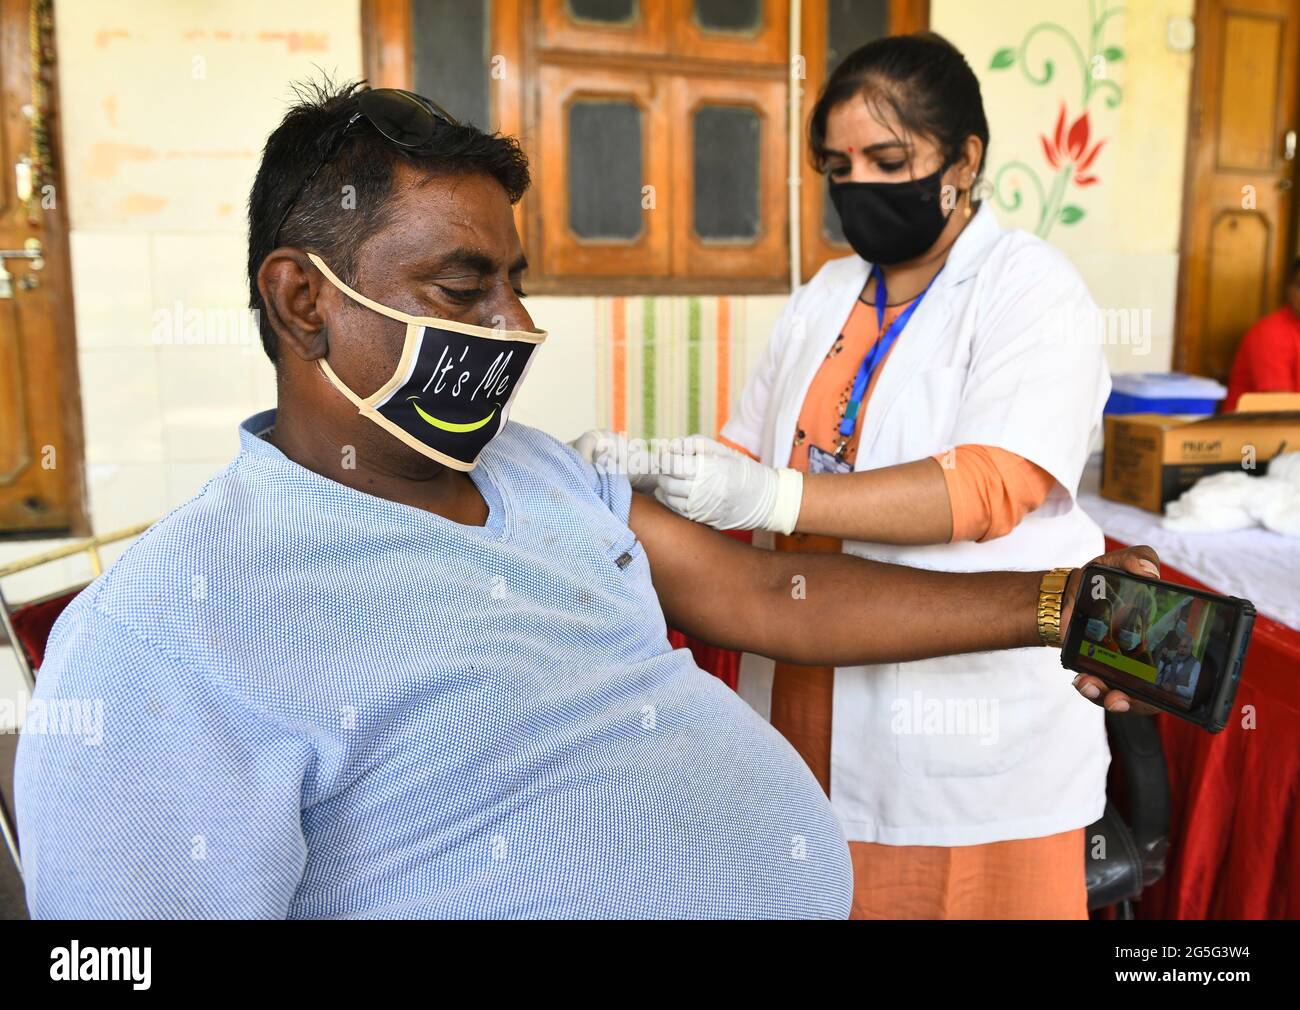 Beawar, India. 27th June, 2021. A beneficiary listen to Indian Prime Minister Narendra Modi's 'Mann ki Baat' as he receives a dose of COVID-19 vaccine during a special one-day vaccination drive at a vaccination center in Beawar. PM Modi speaks about Indian participation in Olympics, vaccine hesitancy, rainwater harvesting and more. (Photo by Sumit Saraswat/Pacific Press) Credit: Pacific Press Media Production Corp./Alamy Live News Stock Photo